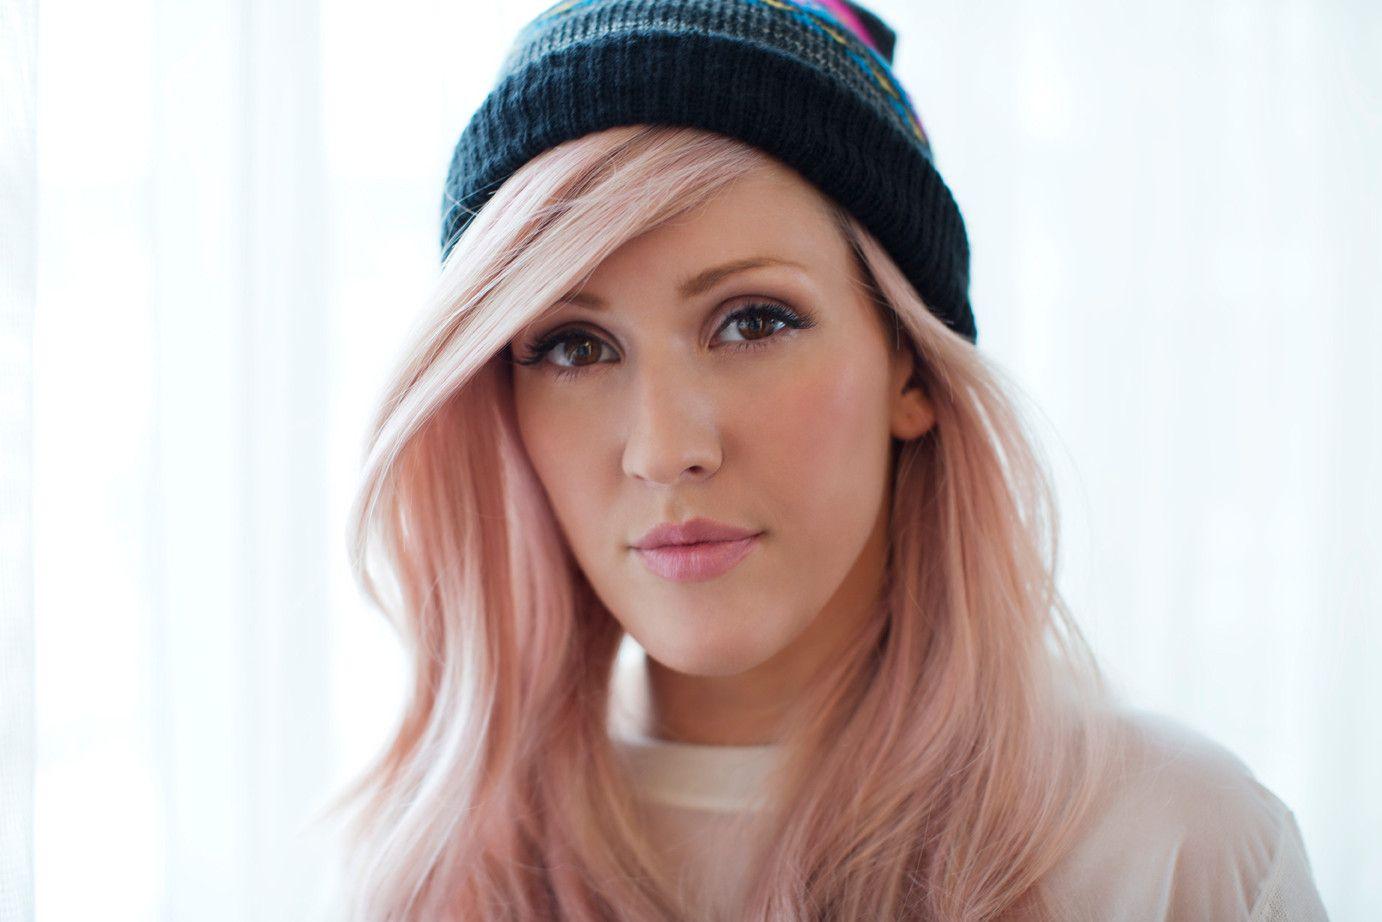 Ellie Goulding Picture 6781 Image HD Wallpaper. Wallfoy.com